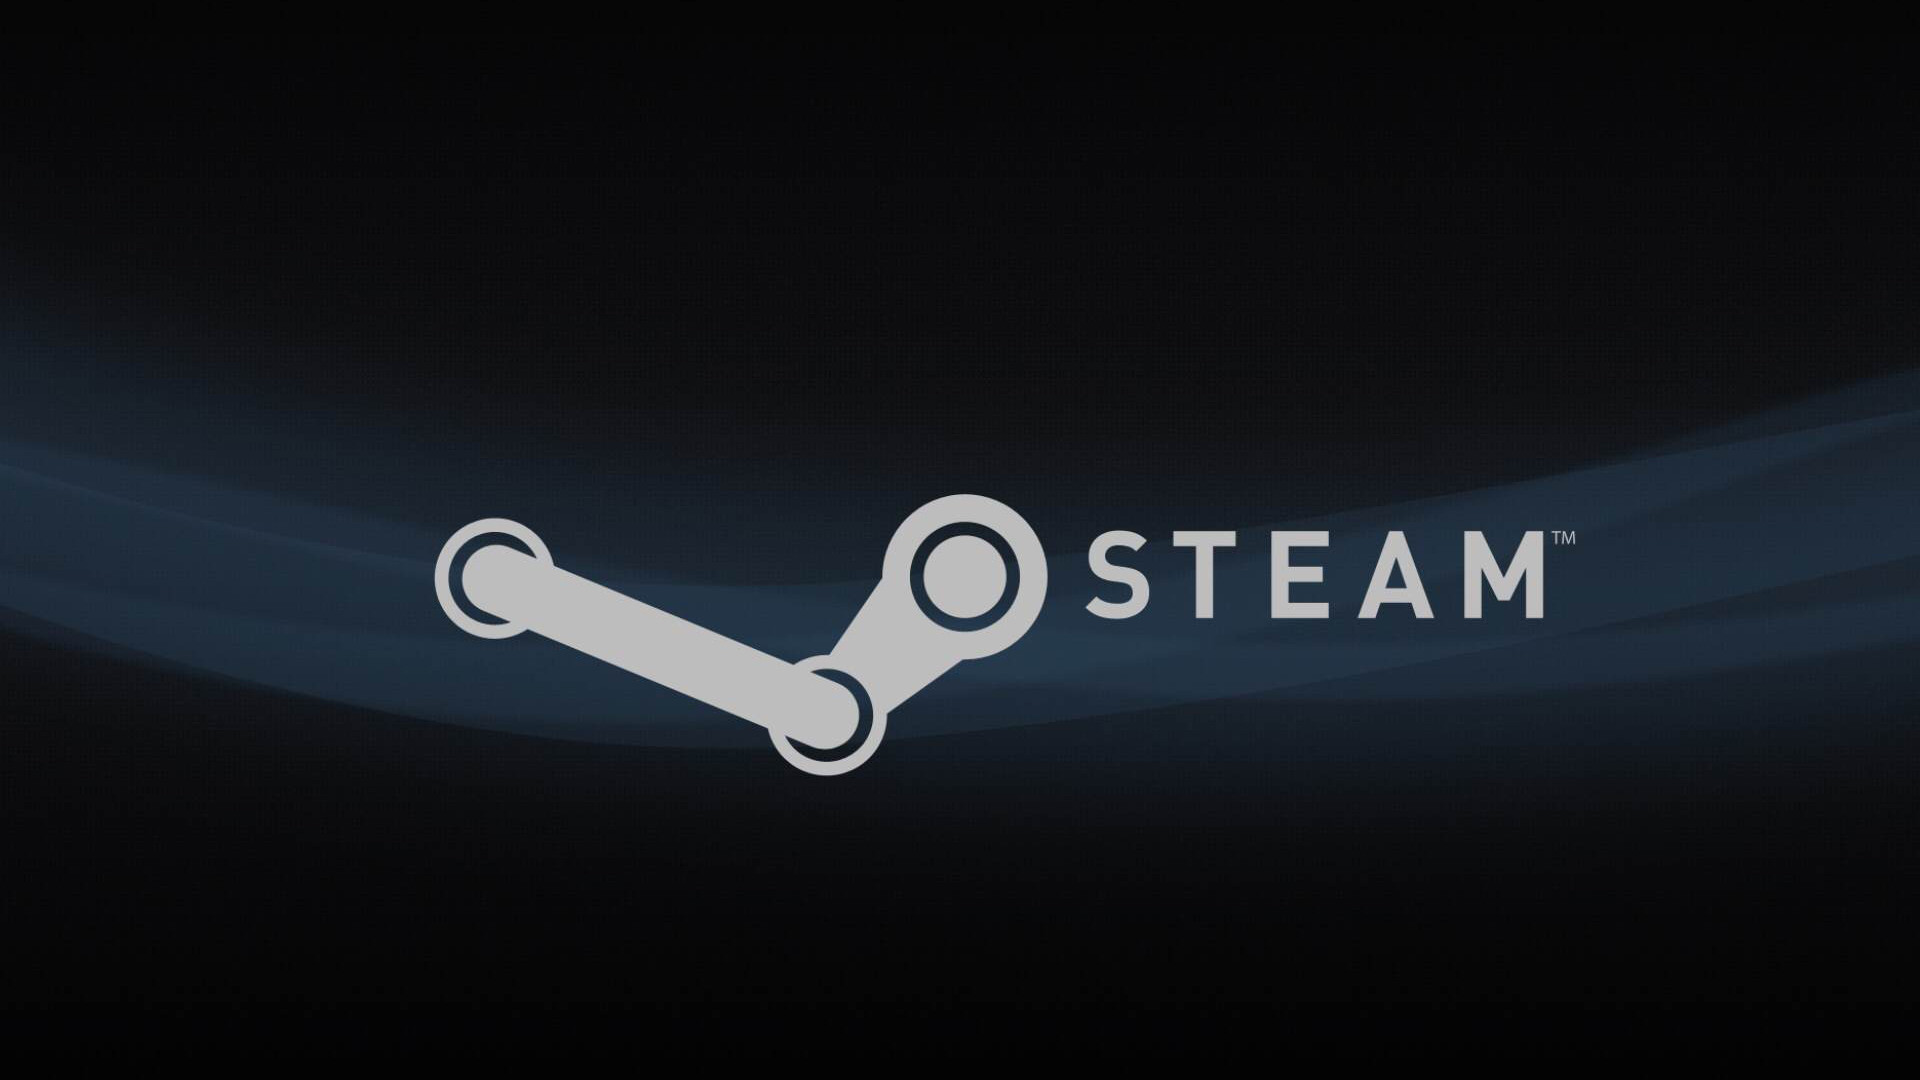 1920x1080 Steam images Steam HD wallpaper and background photos